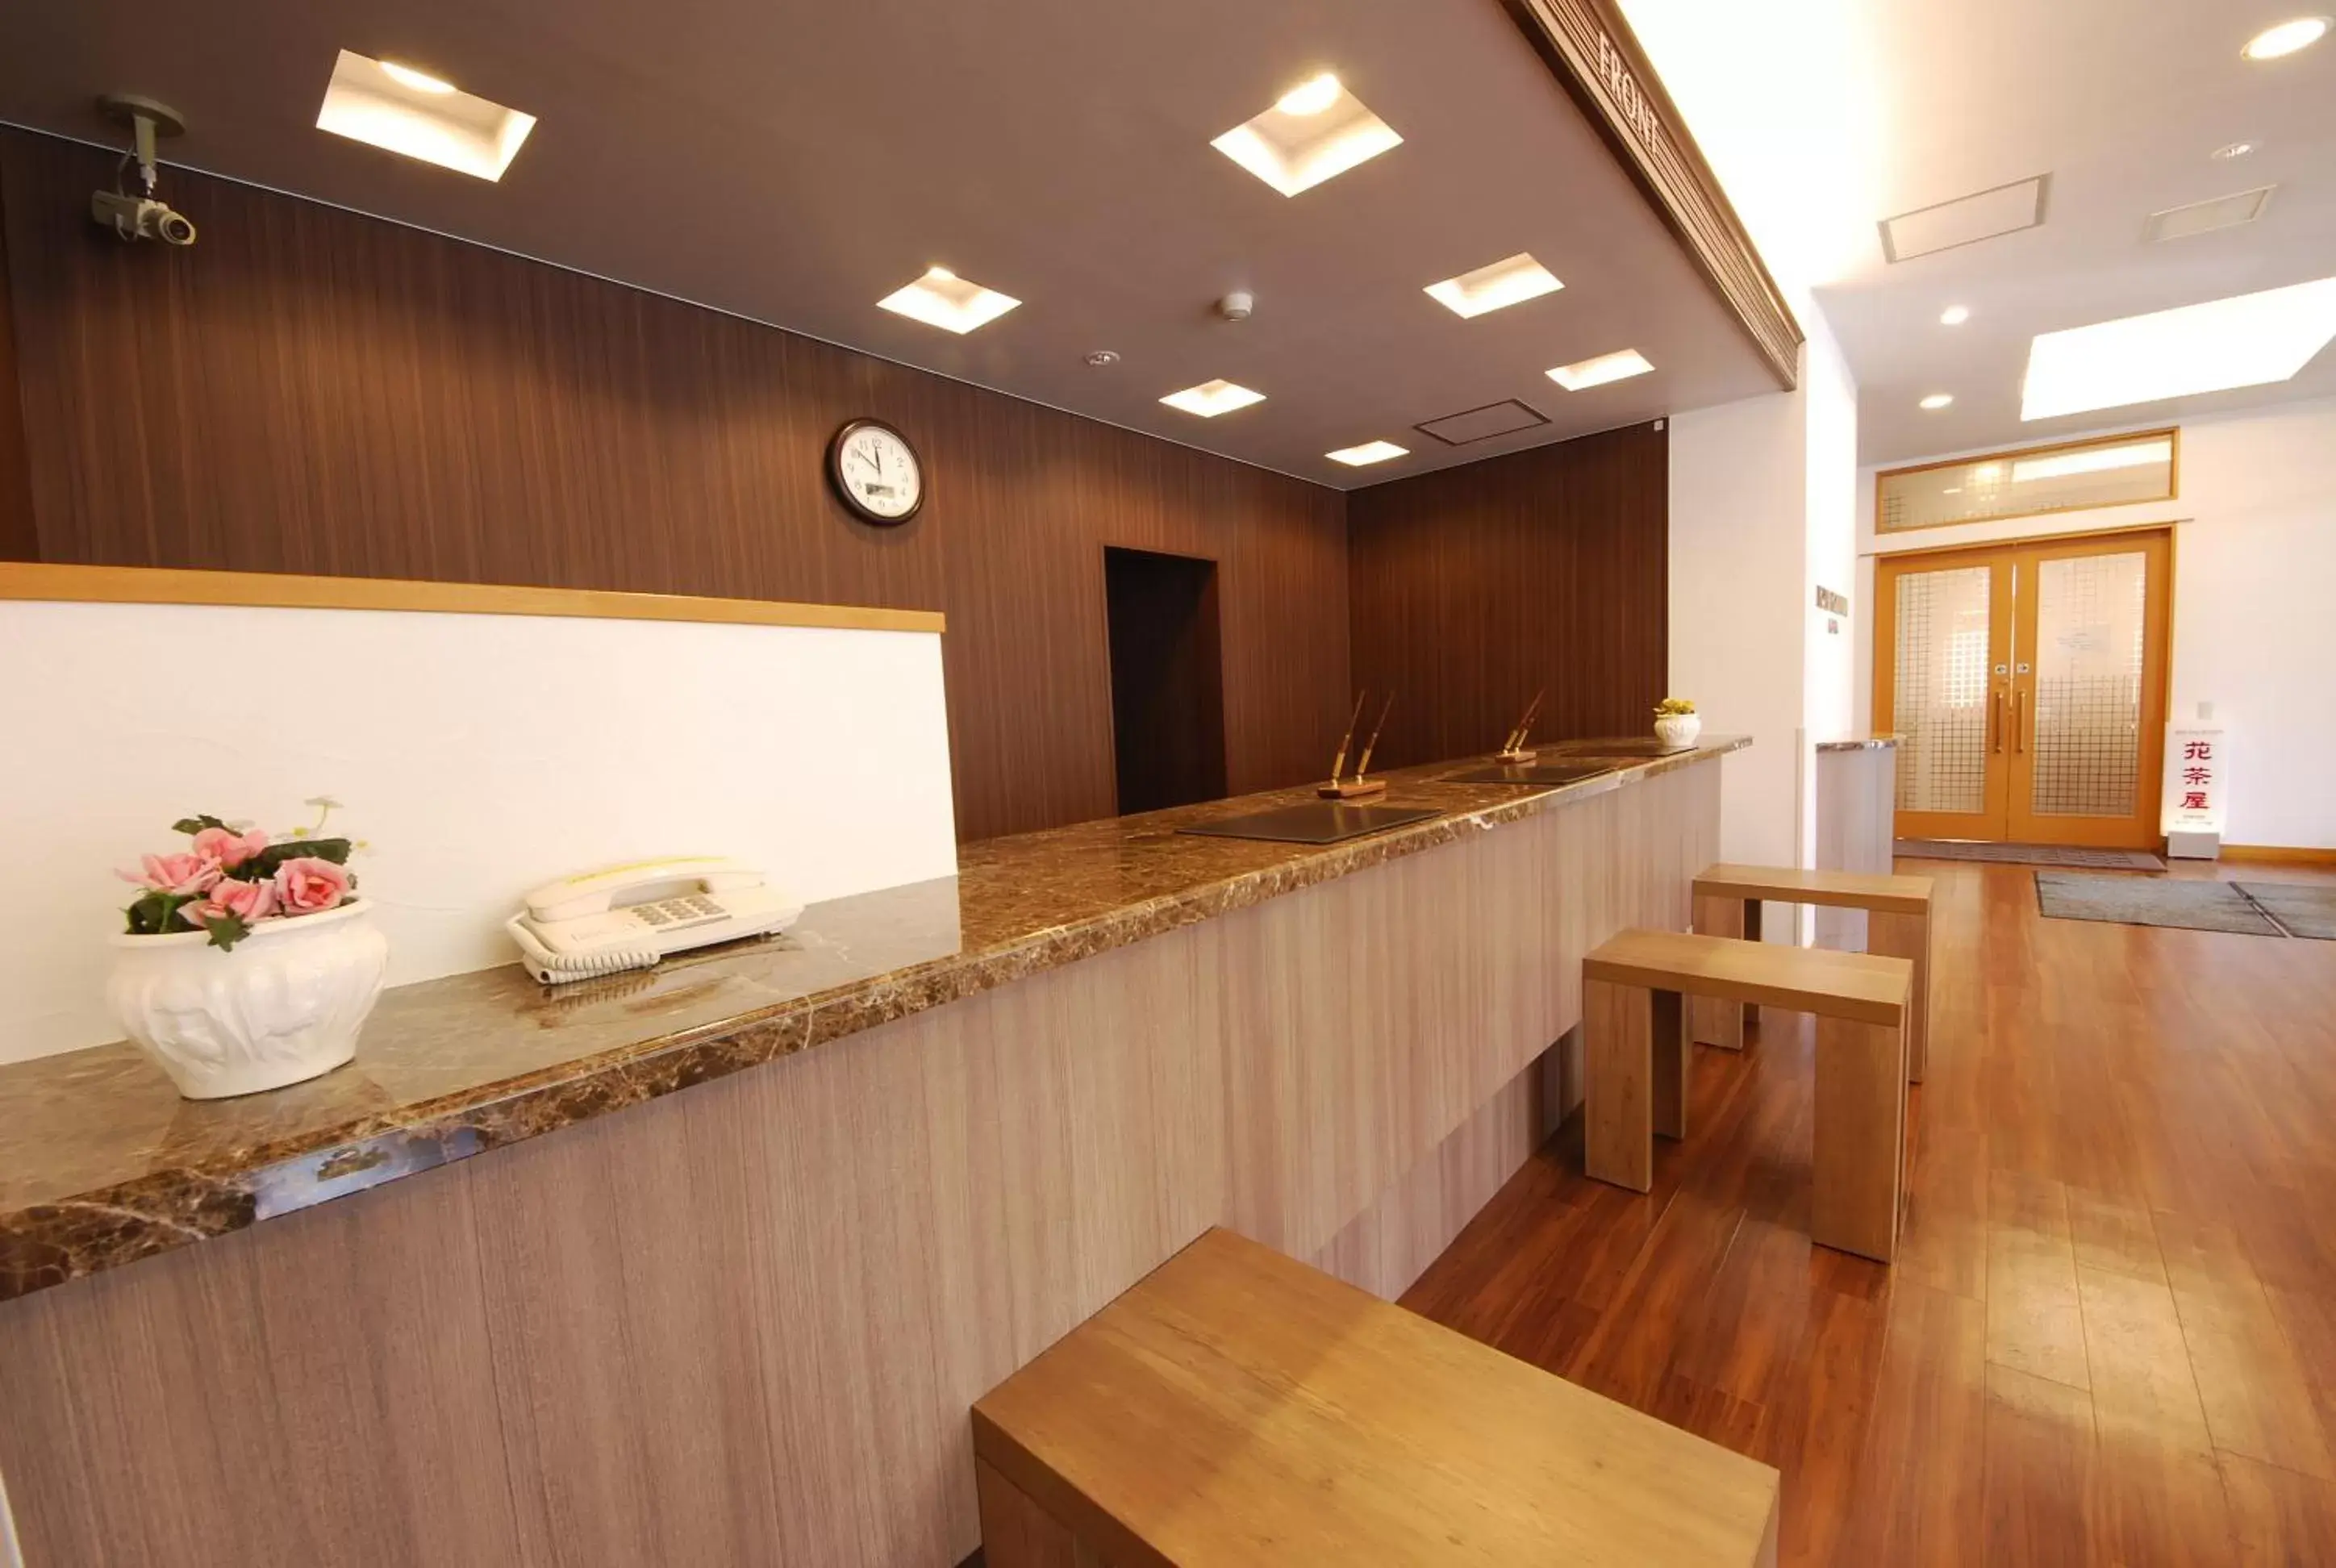 Lobby or reception in Hotel Route-Inn Misawa